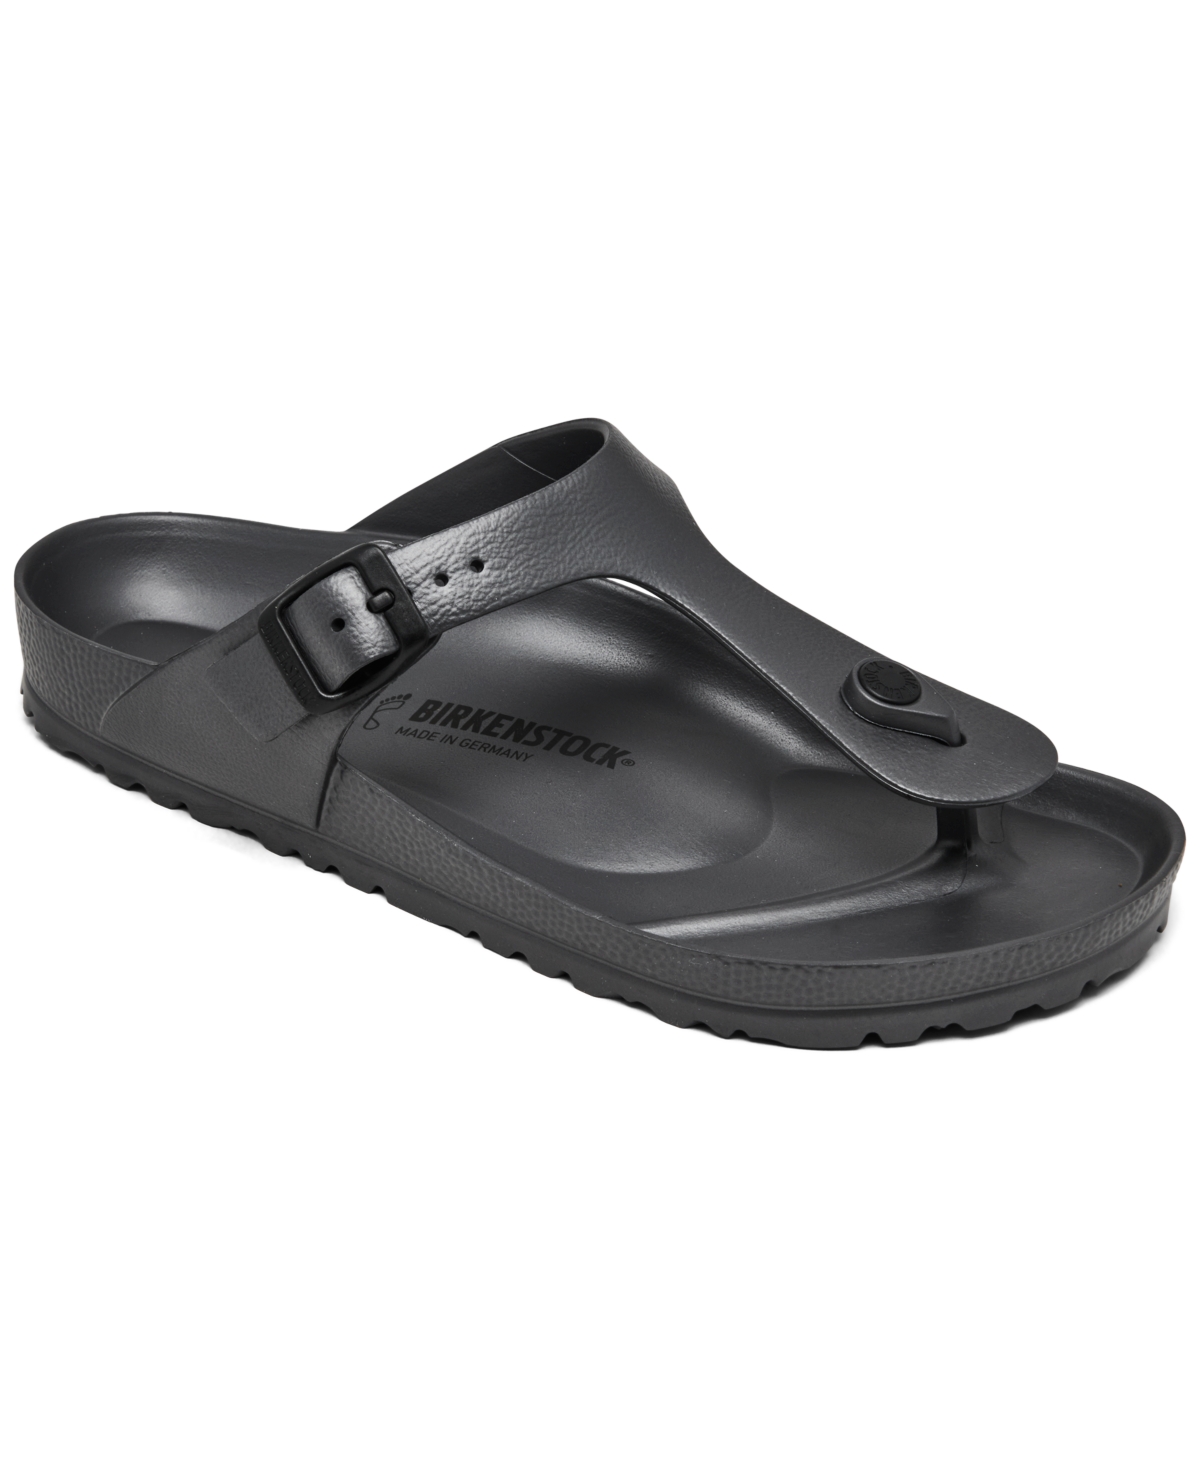 Women's Gizeh Essentials Eva Sandals from Finish Line - Gray